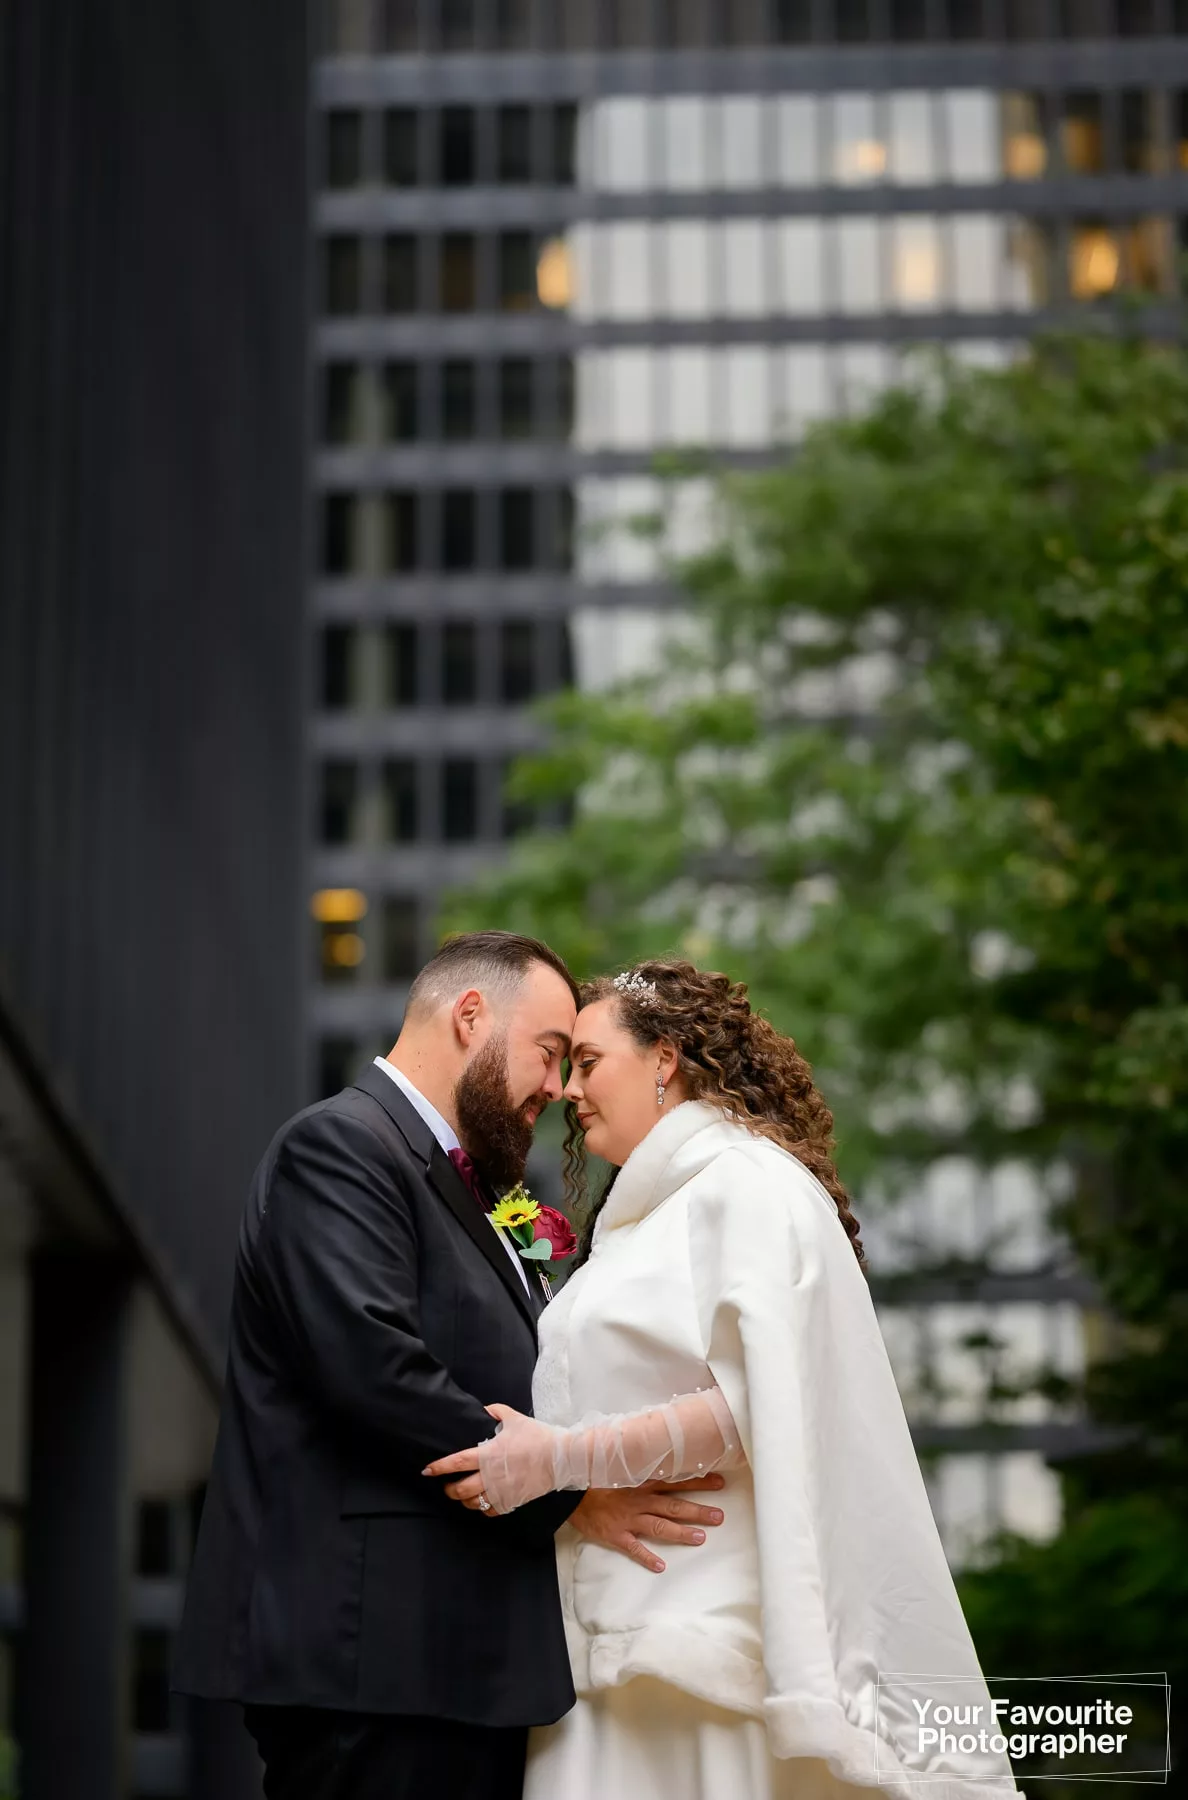 Bride and groom pose for a formal portrait with their foreheads together, in front of downtown Toronto office buildings, on Pearl St